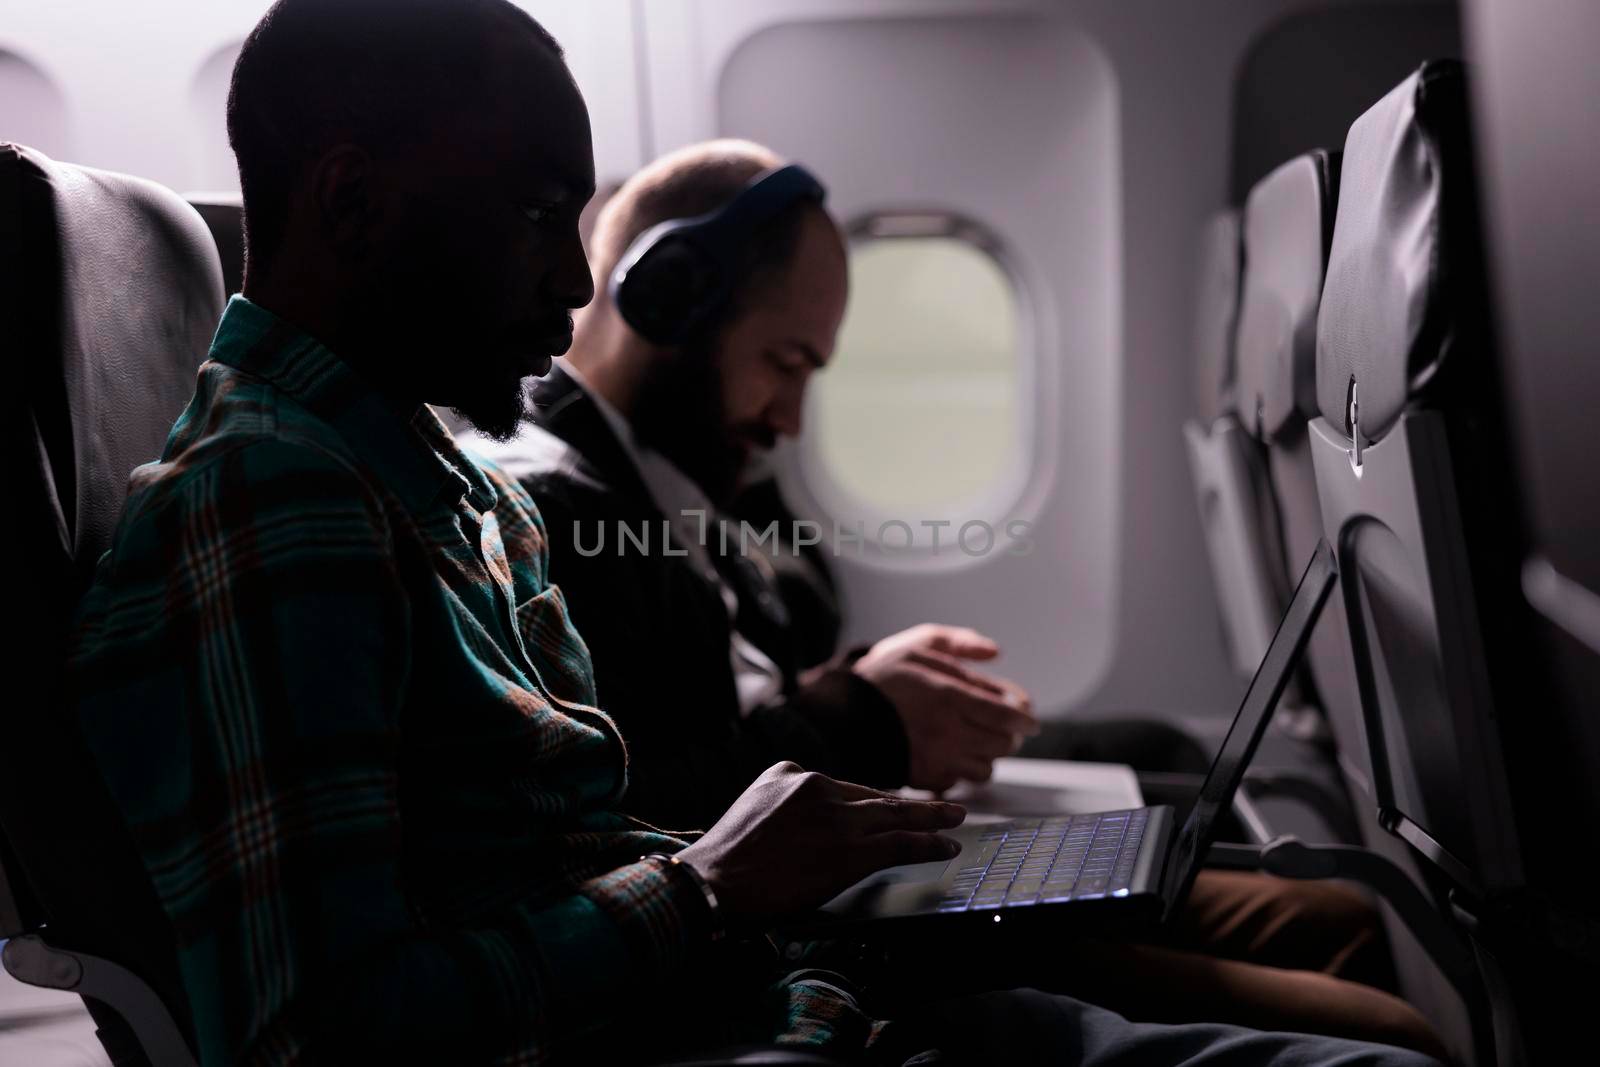 Multiethnic group of people travelling abroad by airplane, flying with international airline in economy class. Going on holiday vacation or business trip with plane tarnsportation service.